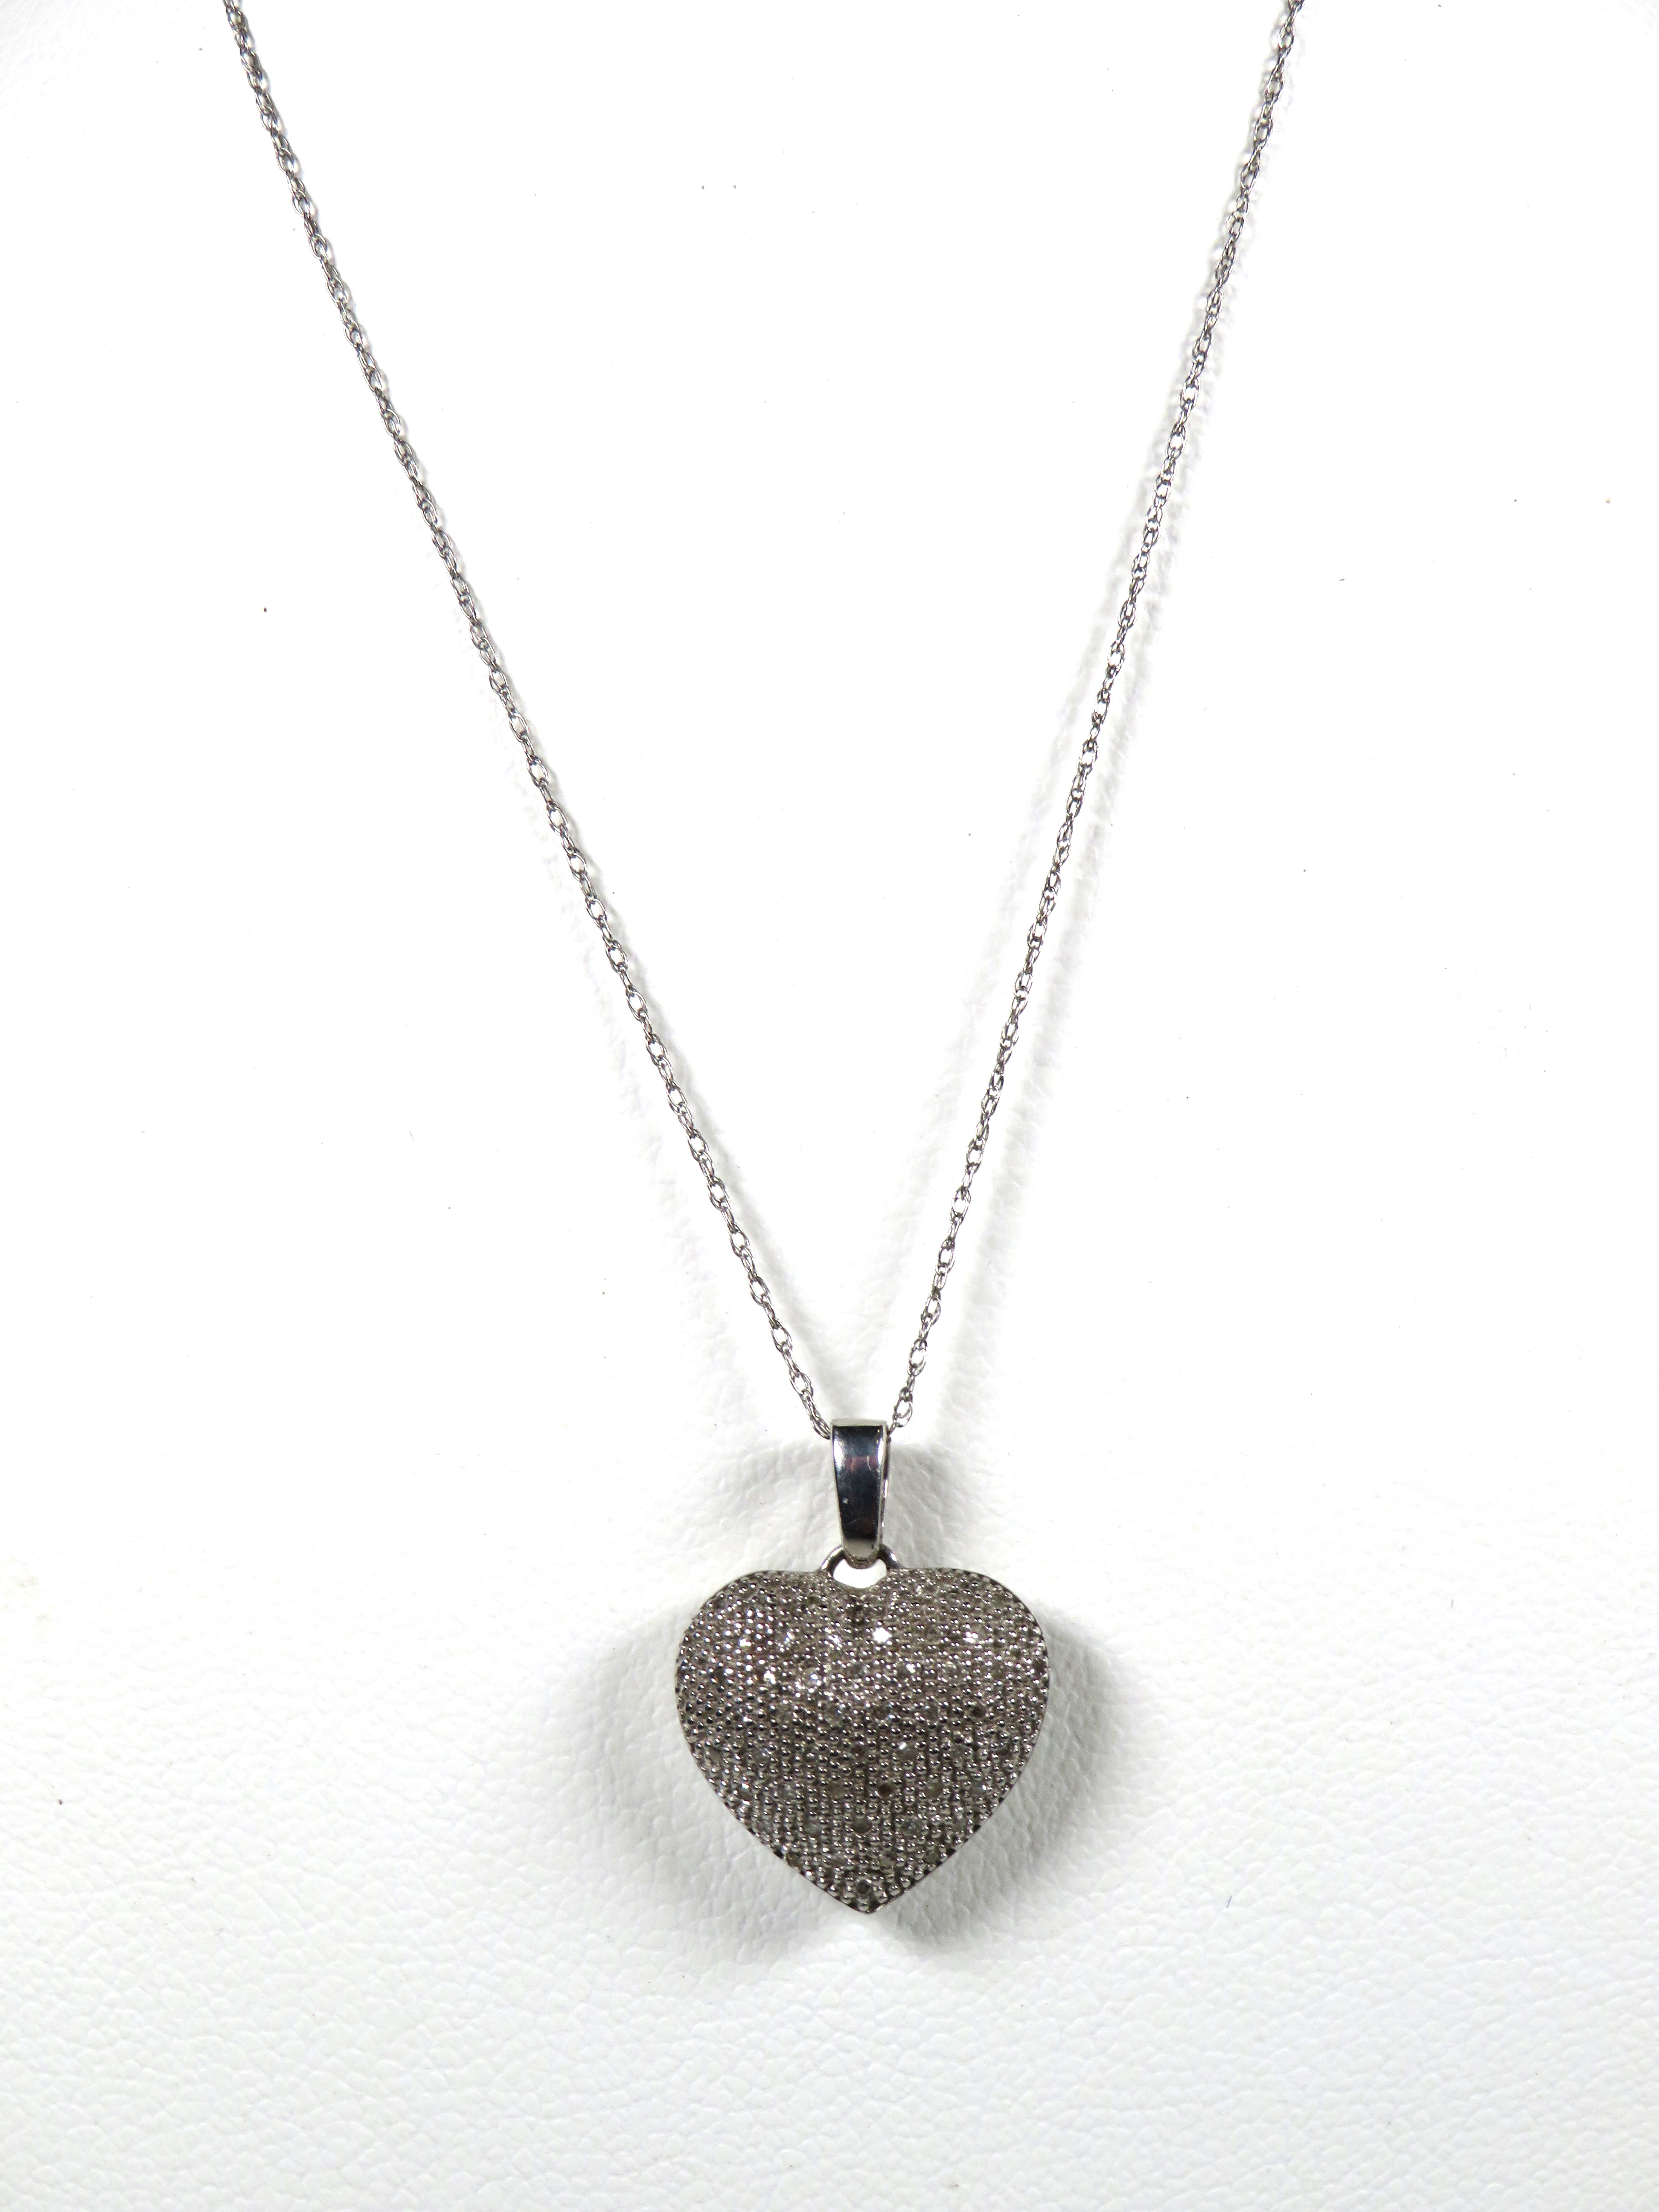 9ct White Gold Heart shaped pendant set on an 18 inch pct White Gold chain.  Total weight 2.7g